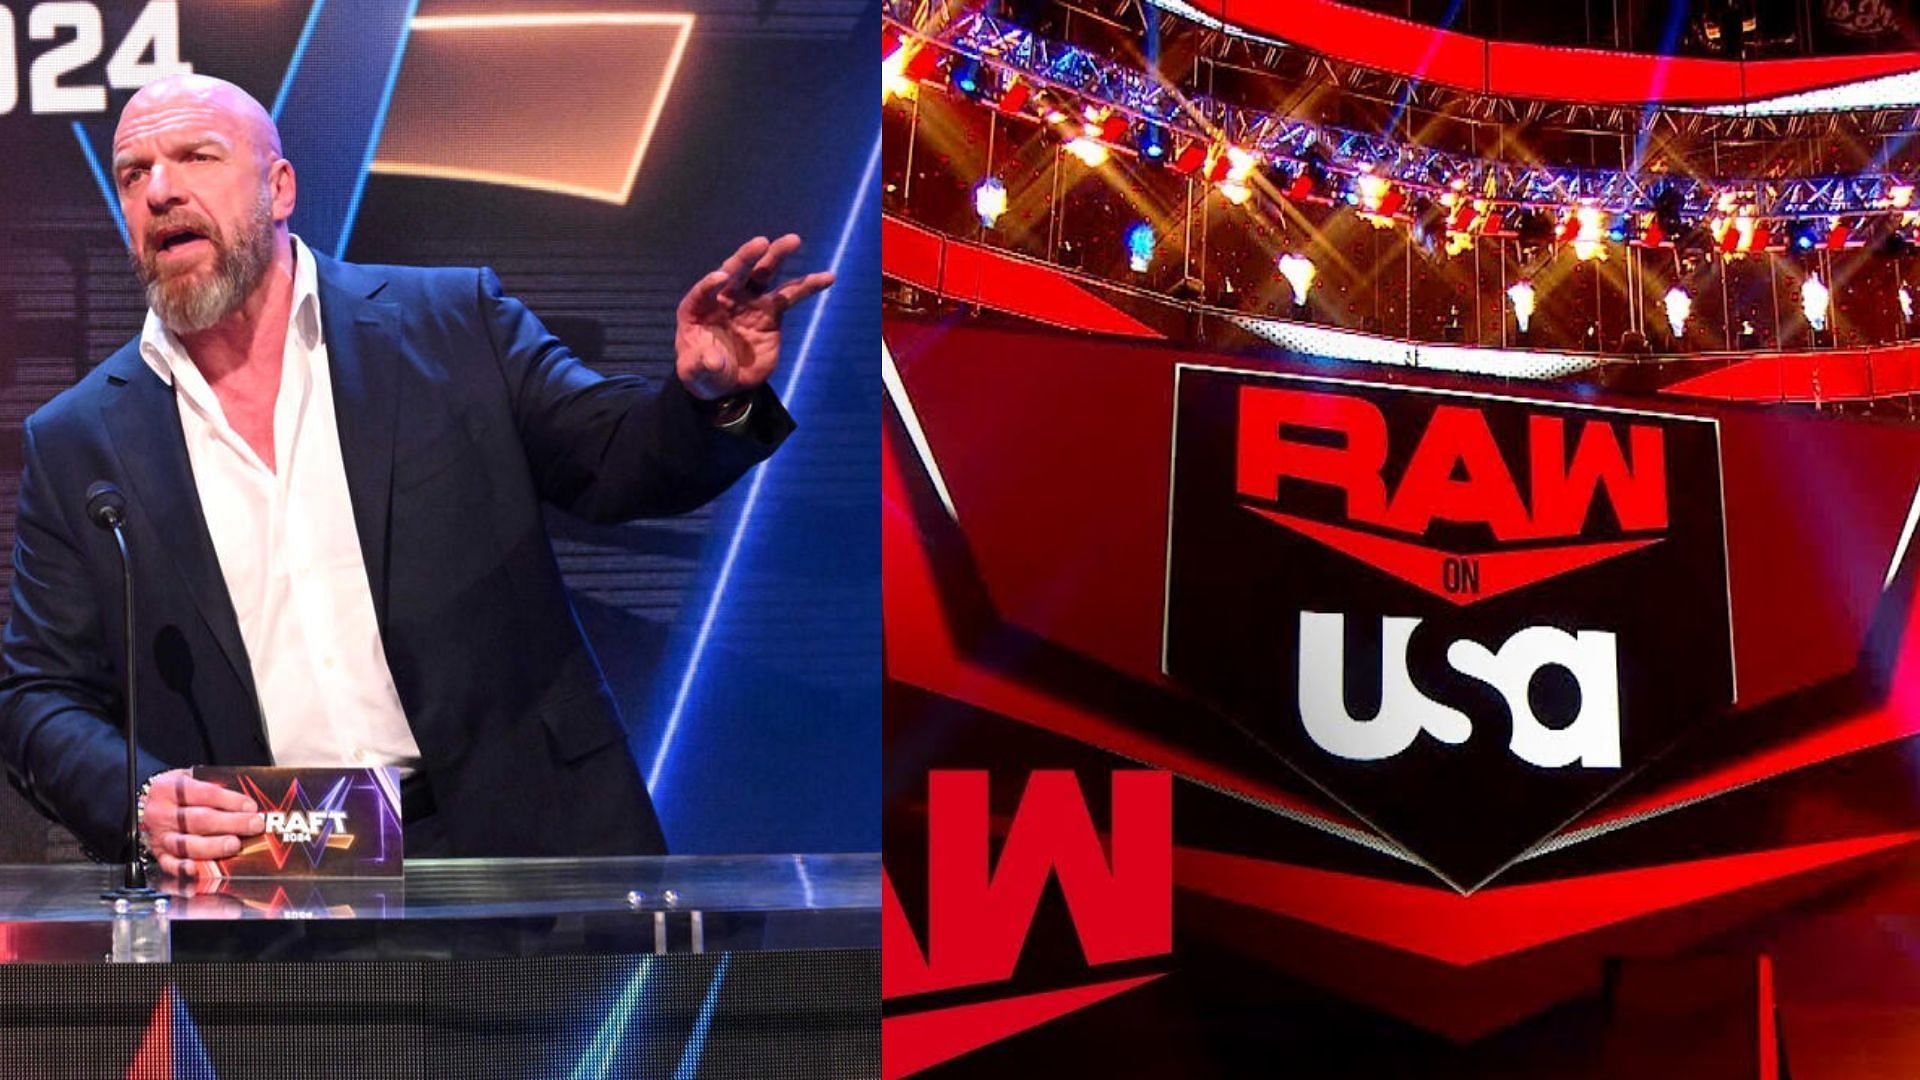 WWE completed their first draft in the Tiple H era on RAW this week